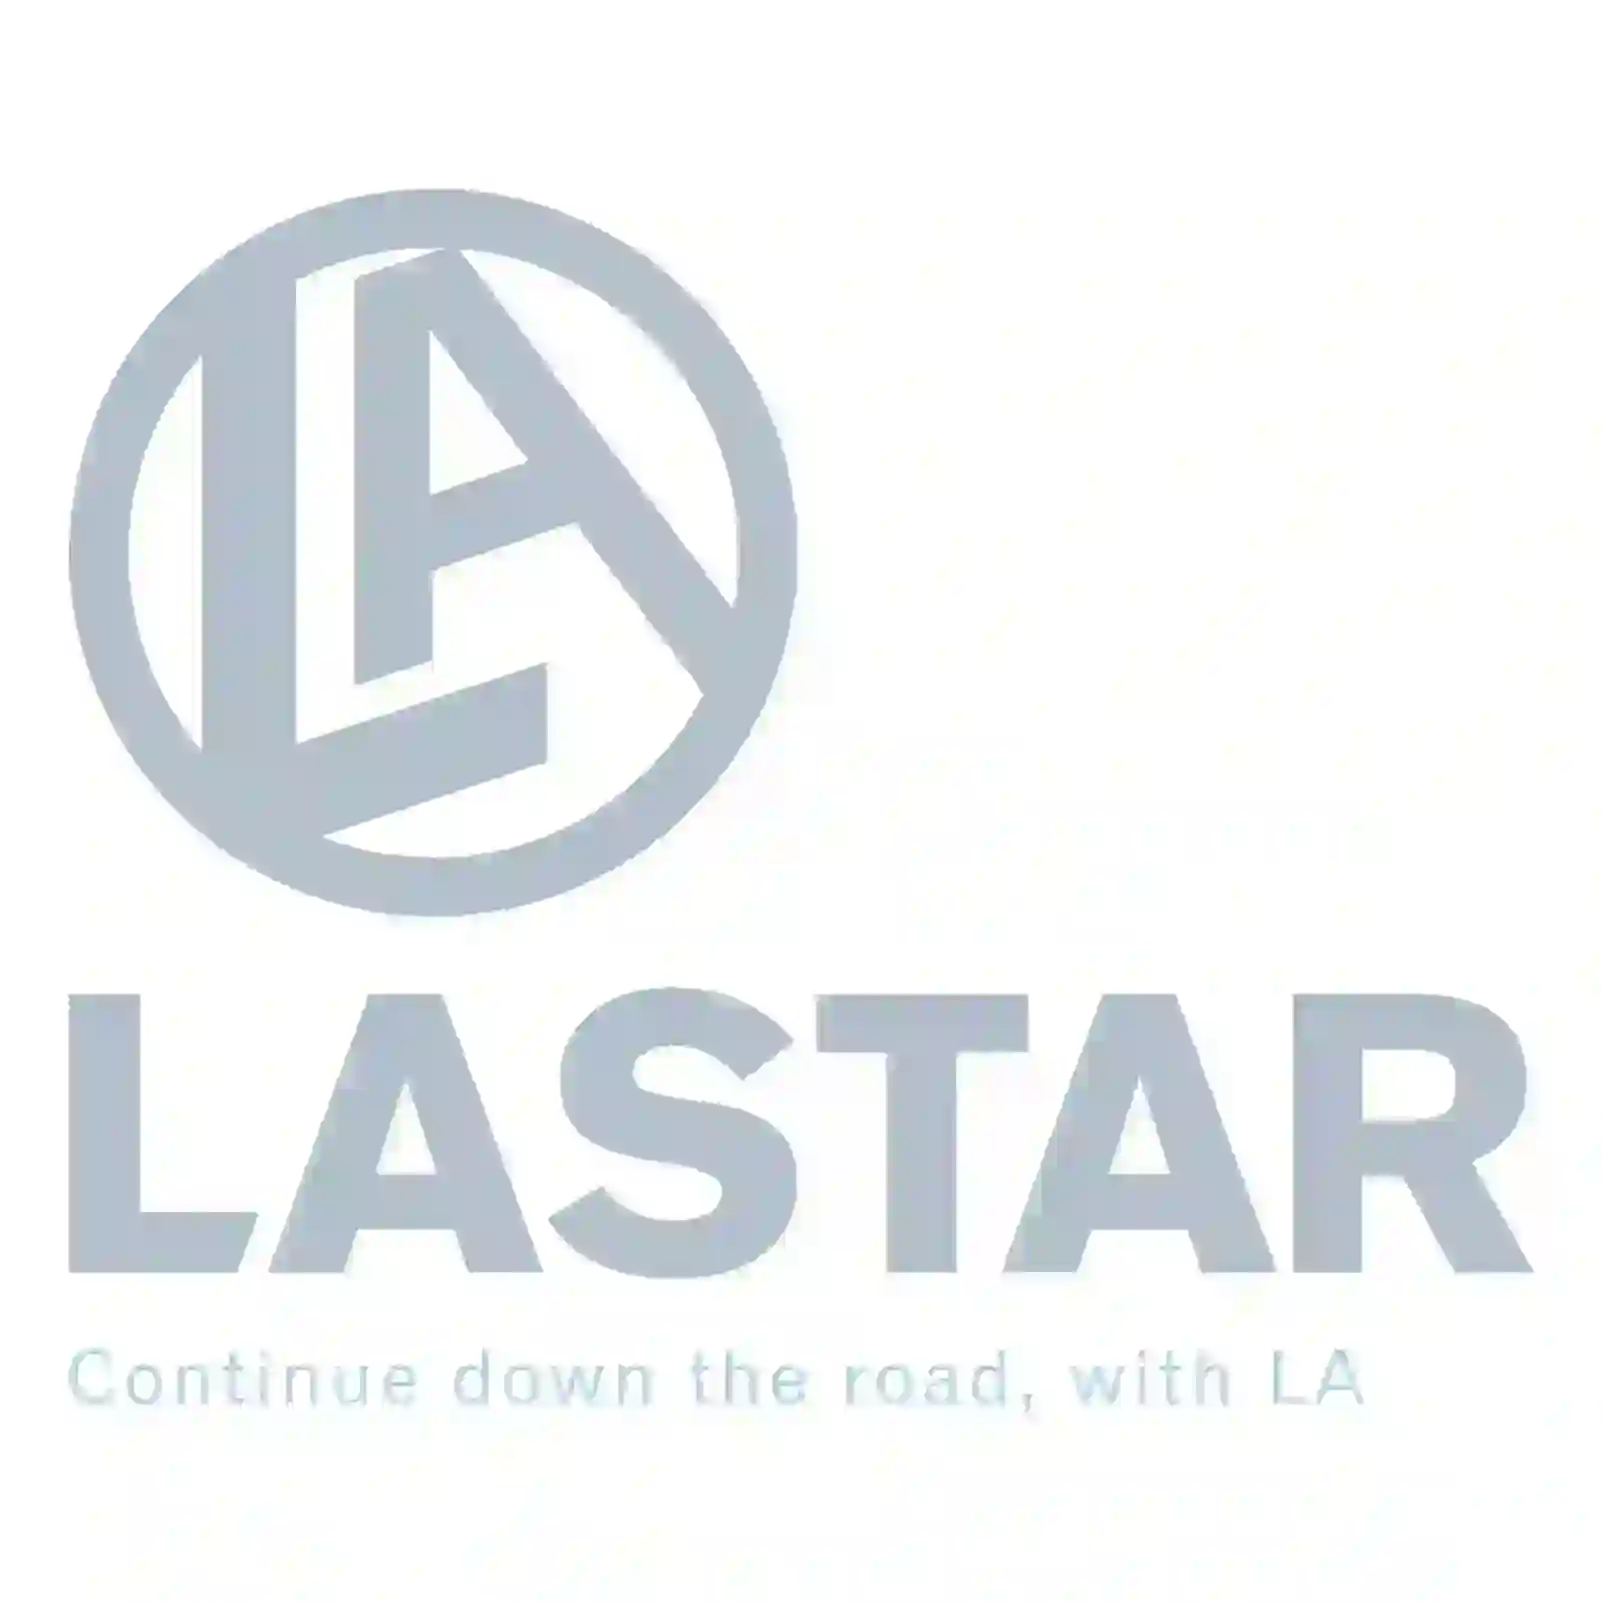  Console, cabin shock absorber || Lastar Spare Part | Truck Spare Parts, Auotomotive Spare Parts